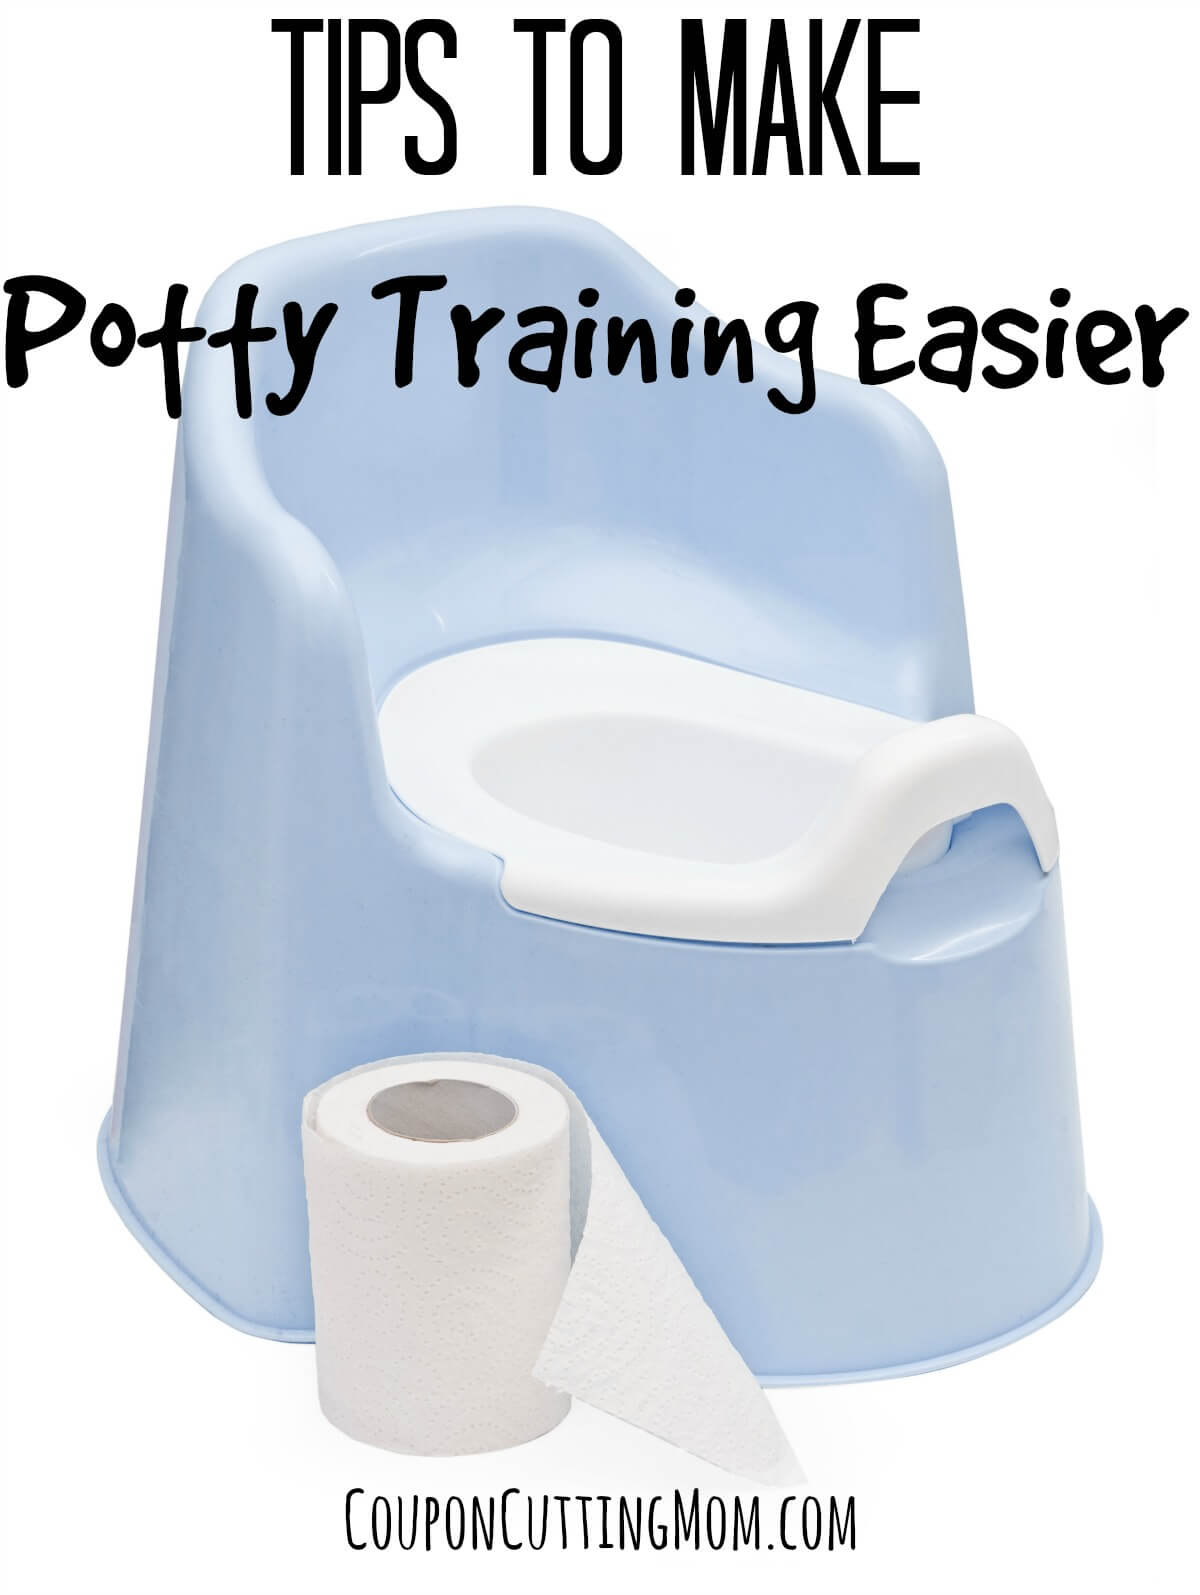 Tips to Make Potty Training Easier + a High Value Printable Pull-Ups® Coupon